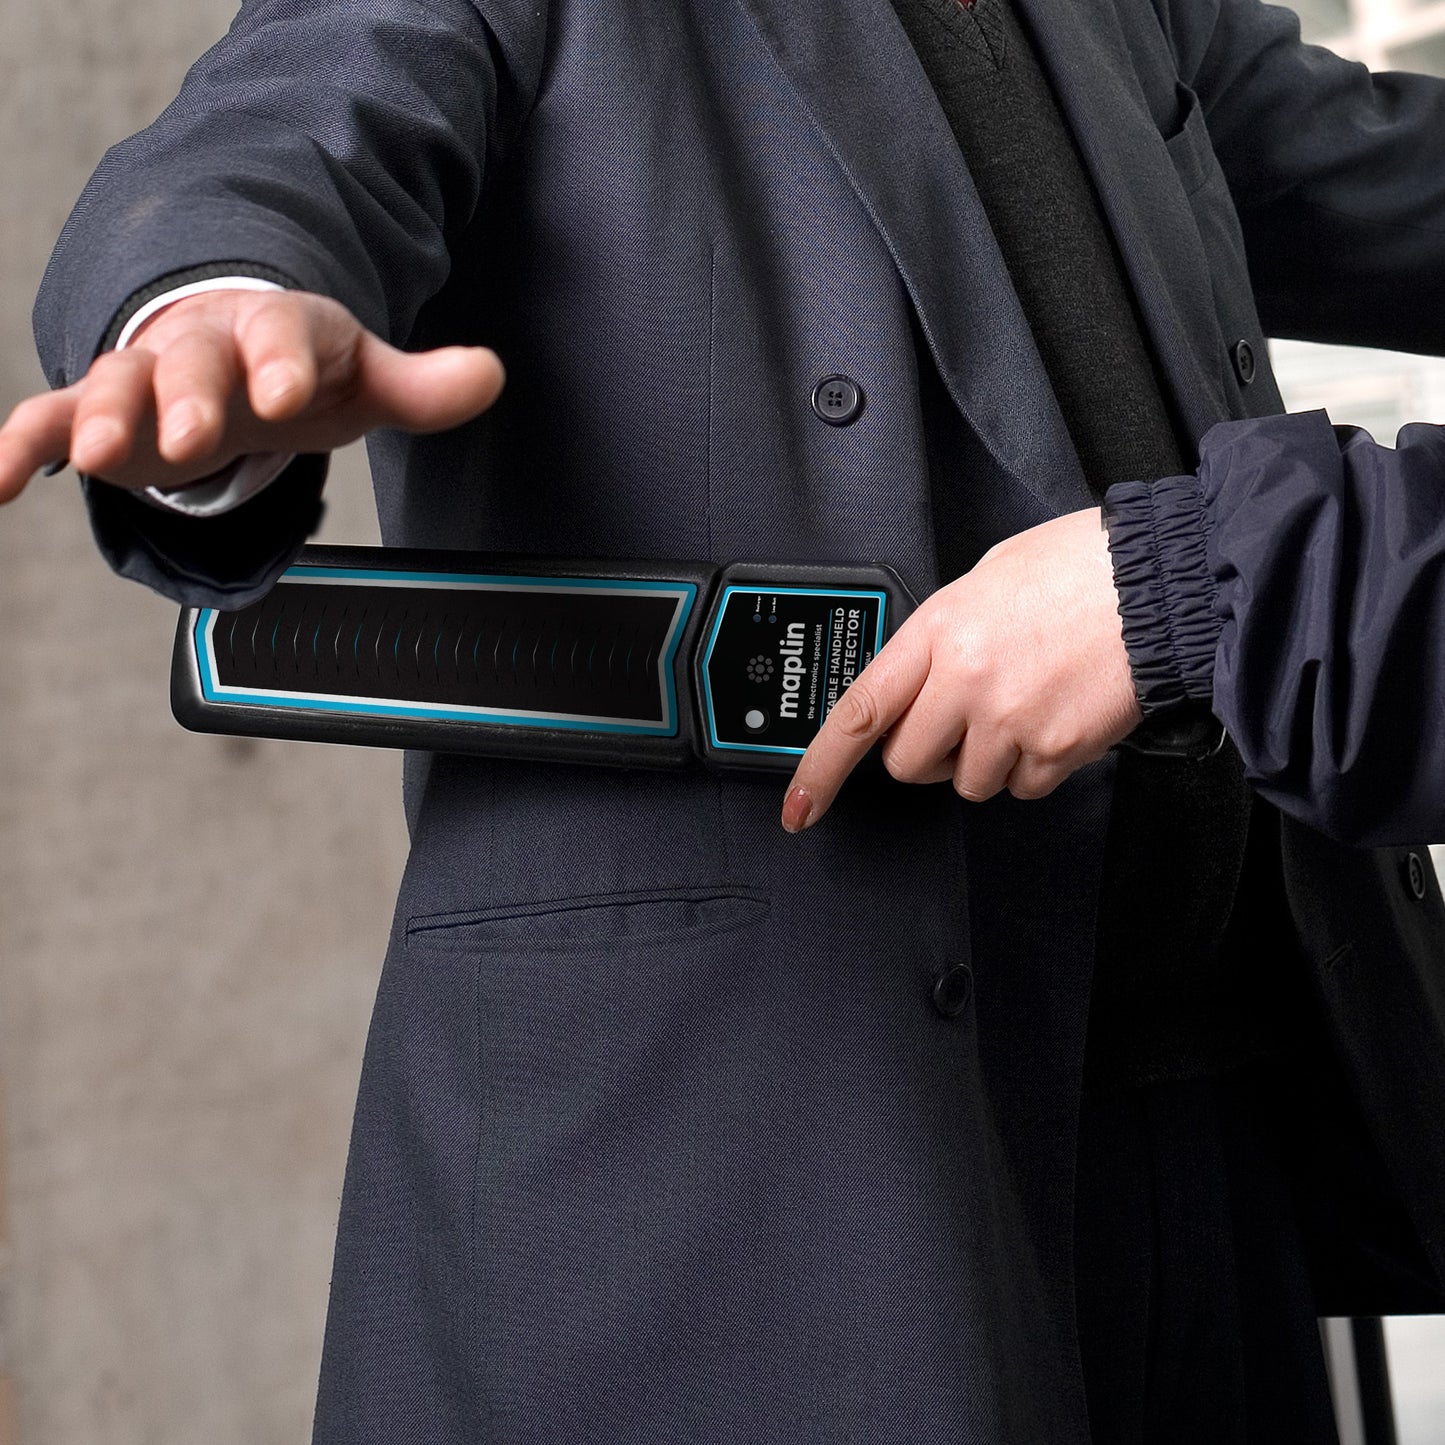 Maplin Portable Hand Held Metal Detector Scanner with High Accuracy Coil - maplin.co.uk